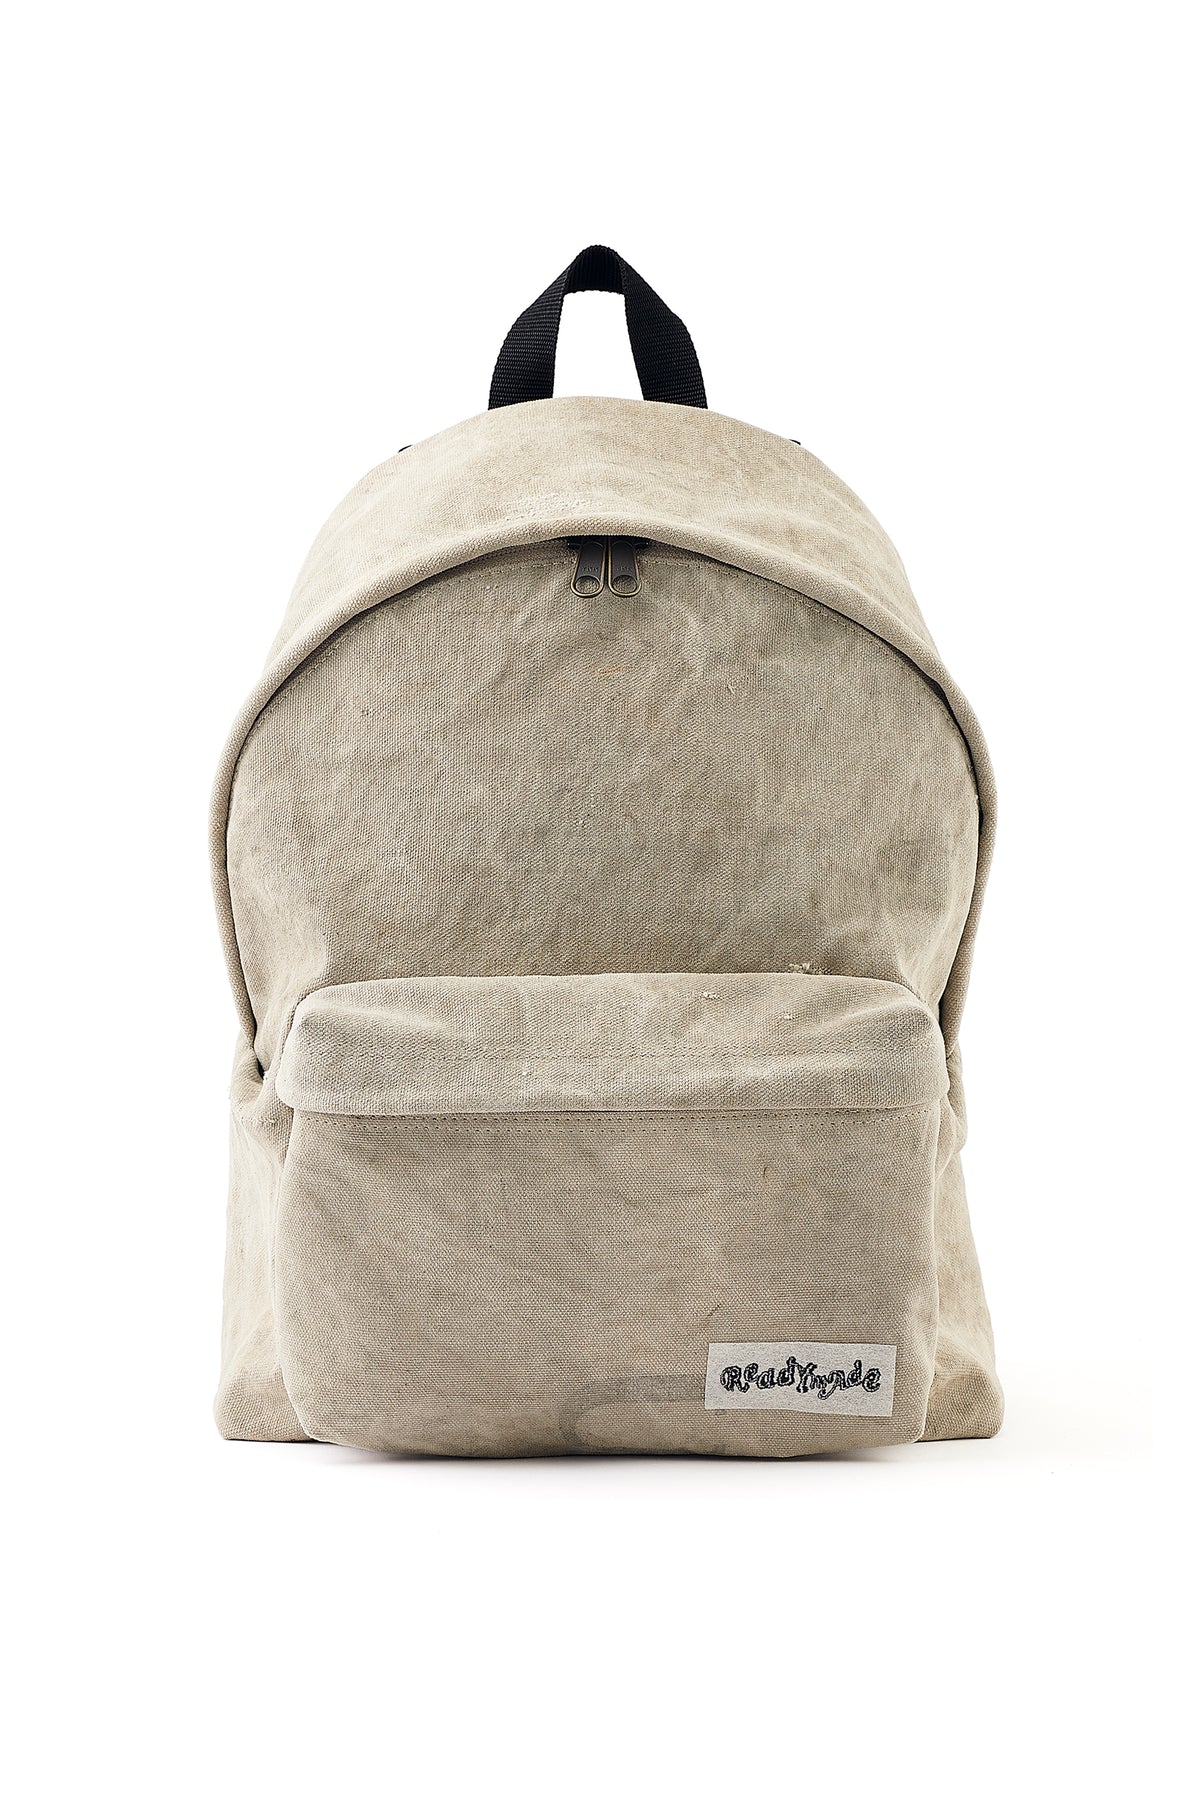 READYMADE BACKPACK / WHT